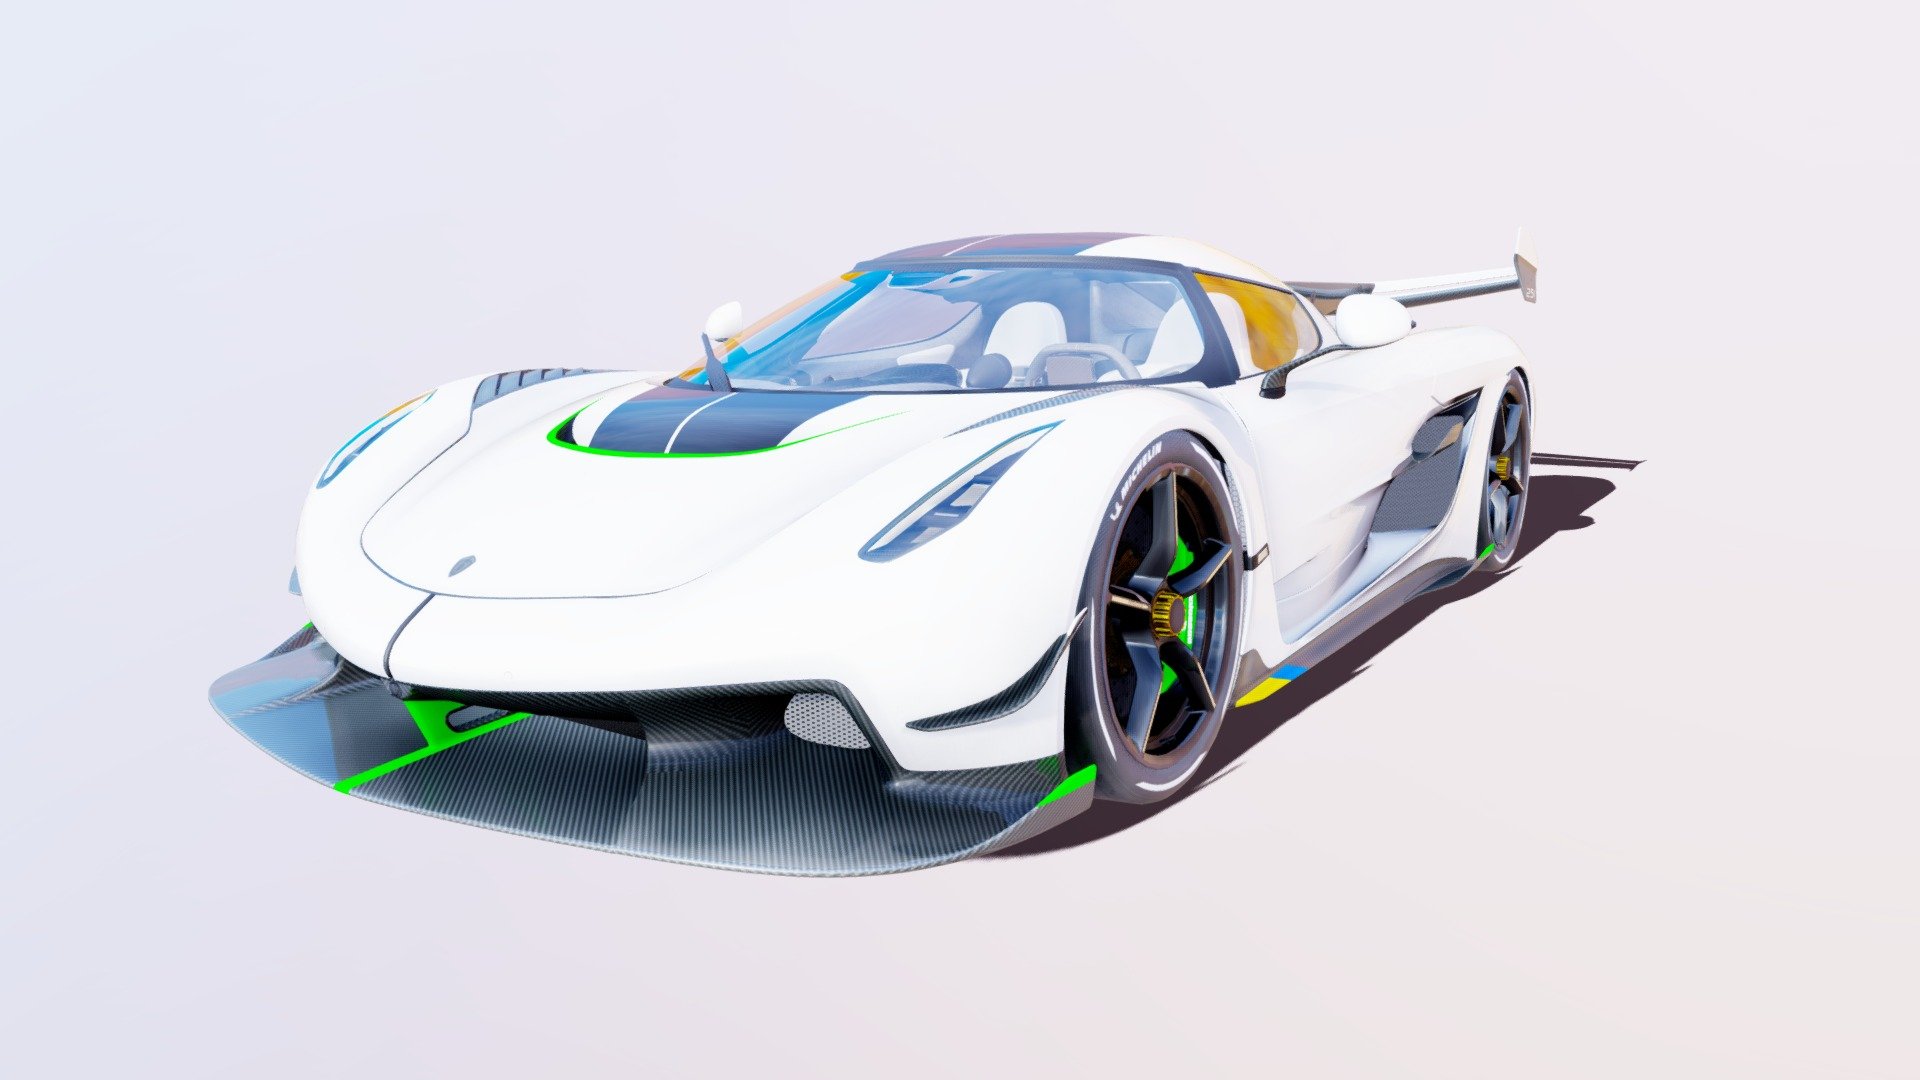 The Jesko is a mid-rear engine supercar produced in limited series by the Swedish automobile manufacturer Koenigsegg. Introduced at the 2019 Geneva Motor Show, it succeeds the Regera. The name Jesko is a tribute to the founder's father, Jesko Von Koenigsegg 3d model